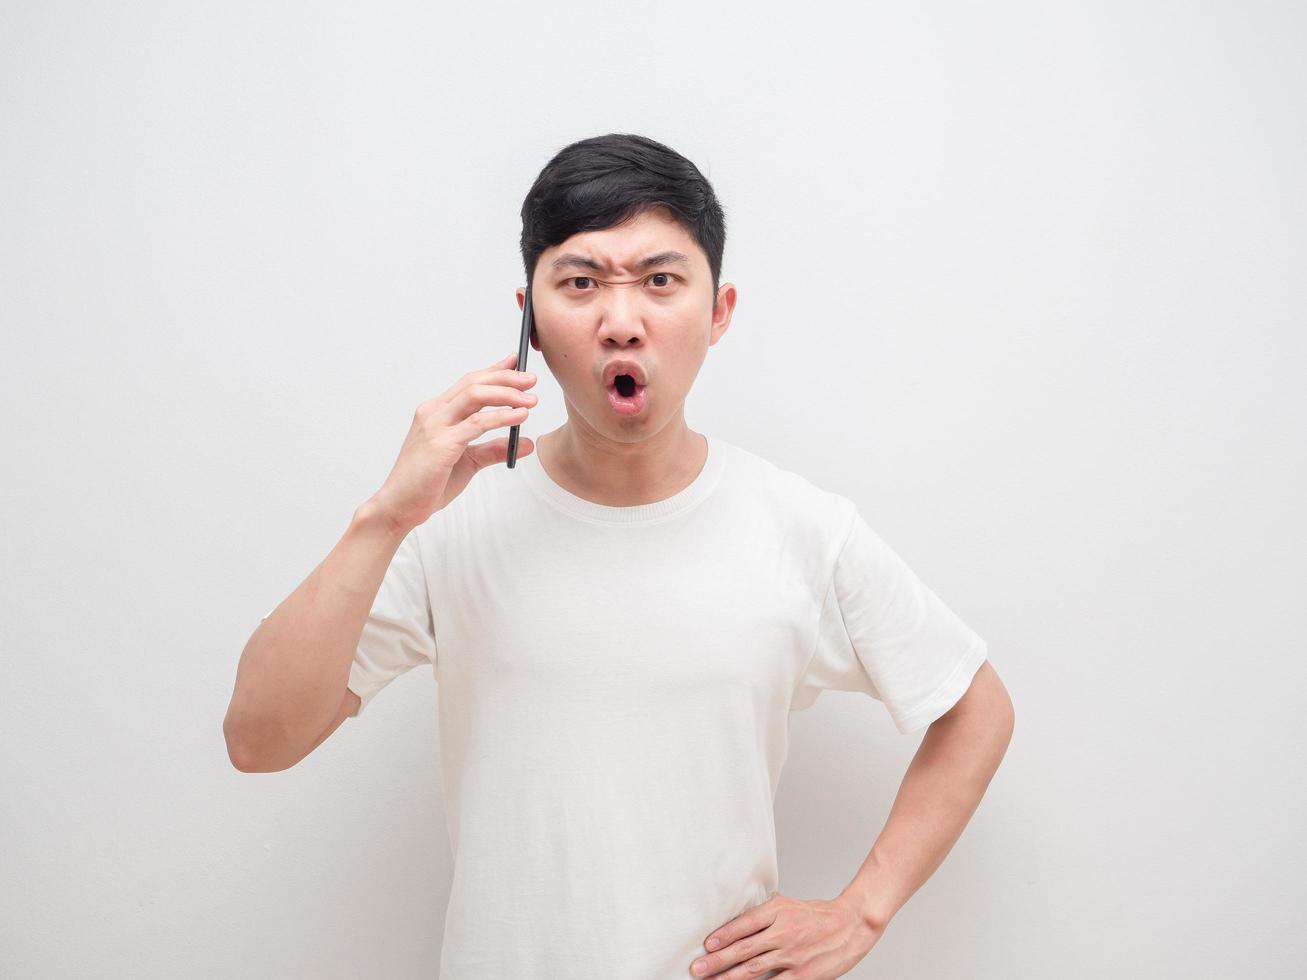 Asian man talk with smartphone in hand serious face say no look at camera on white background photo